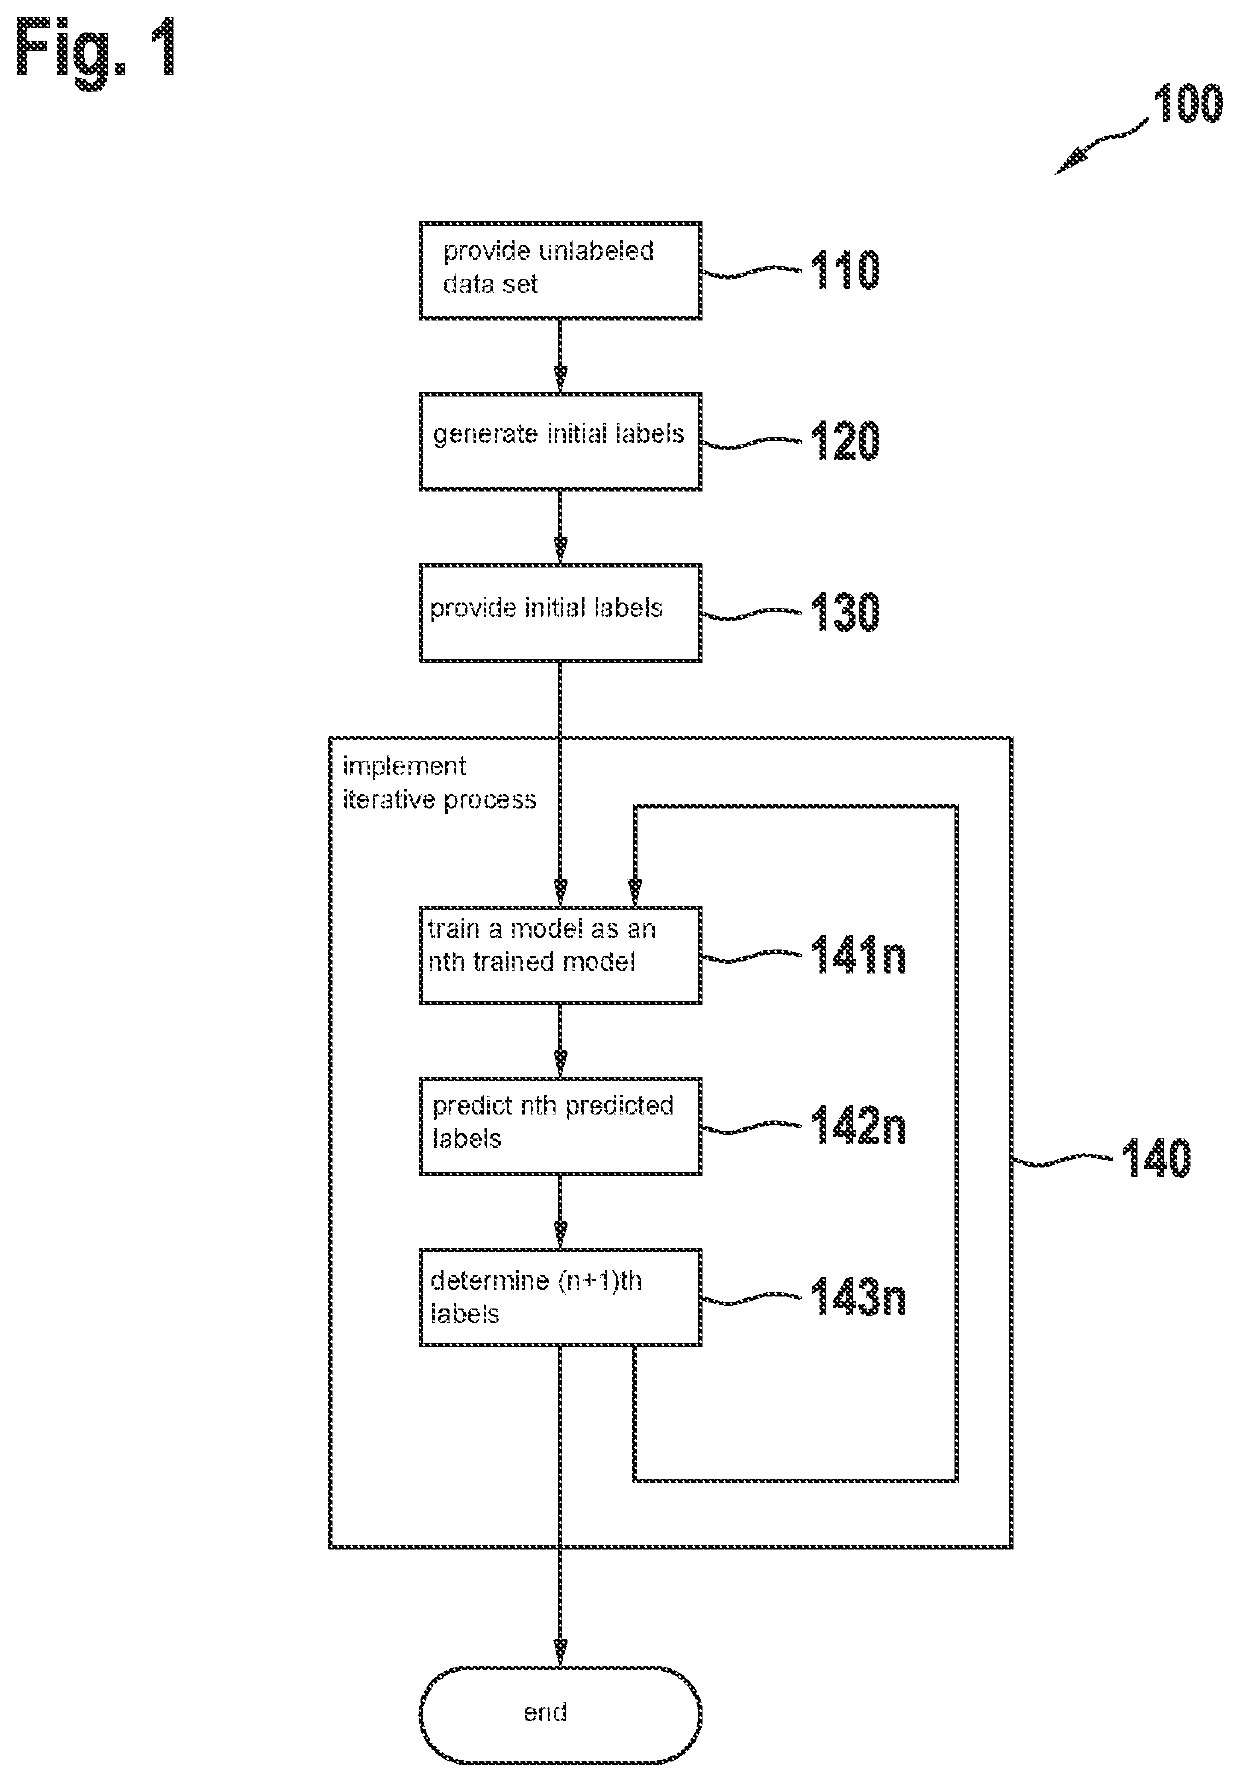 Method for generating labeled data, in particular for training a neural network, by improving initial labels